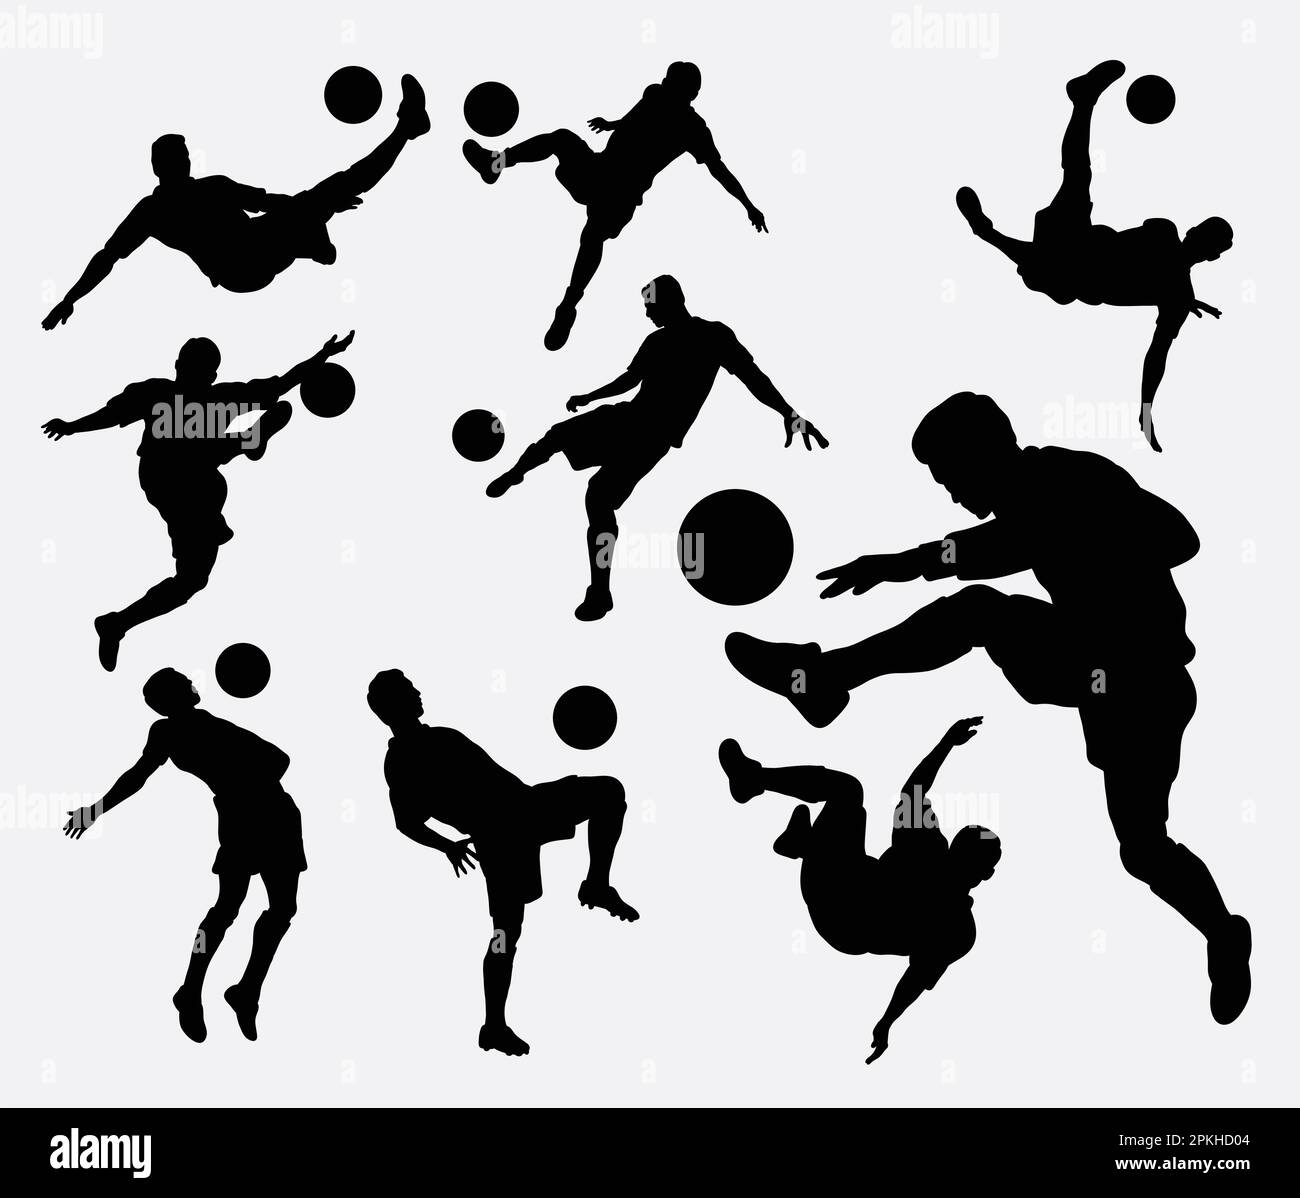 People playing soccer silhouette Stock Vector